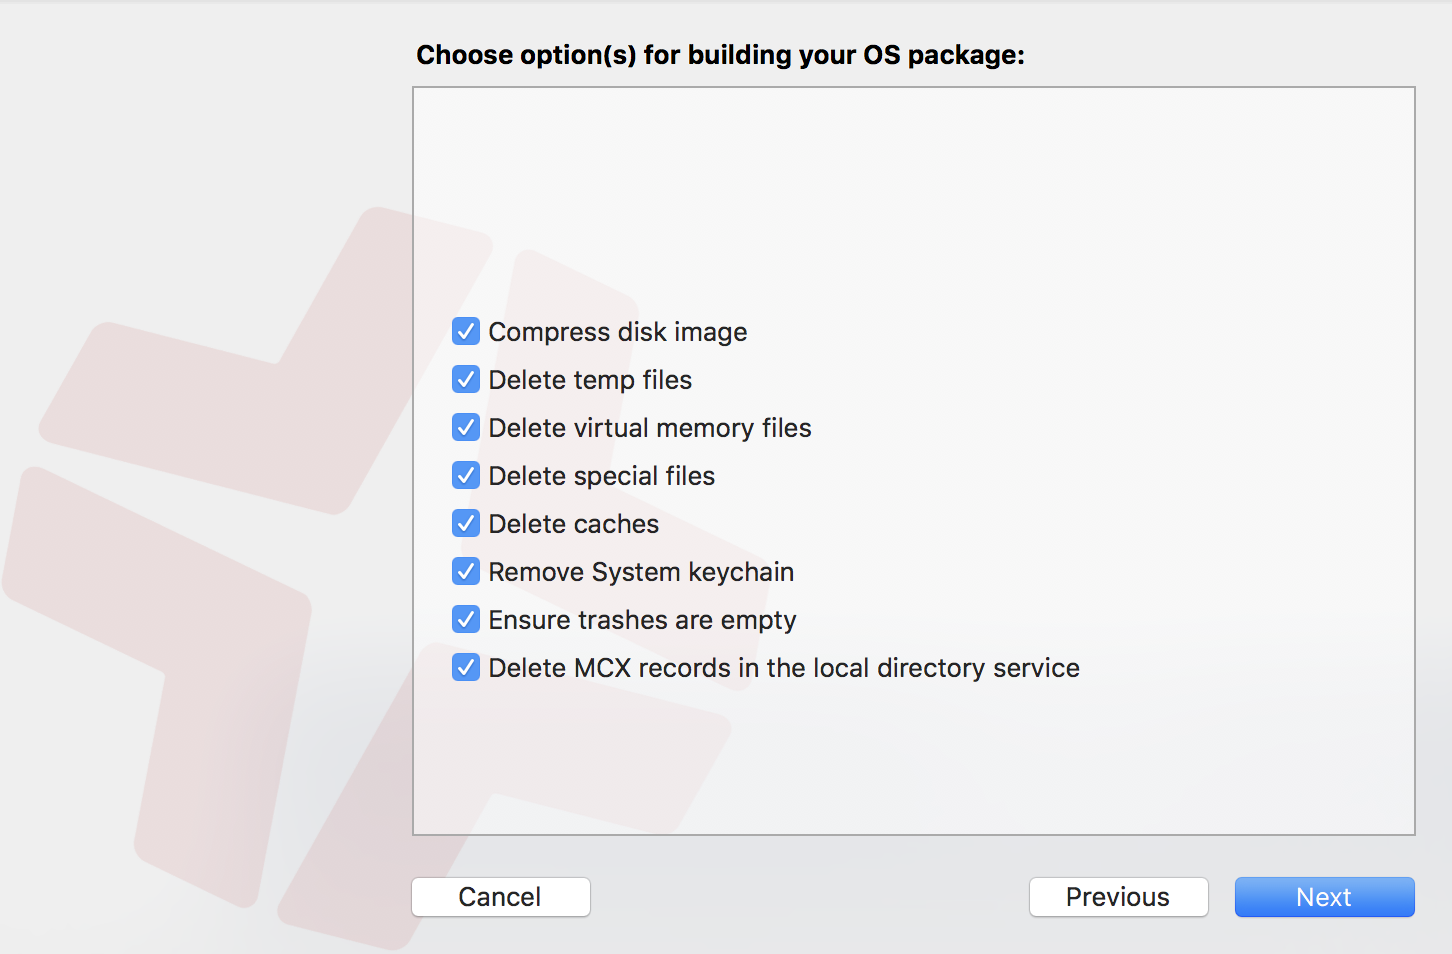 images/download/attachments/18787286/Build_OS_package.png